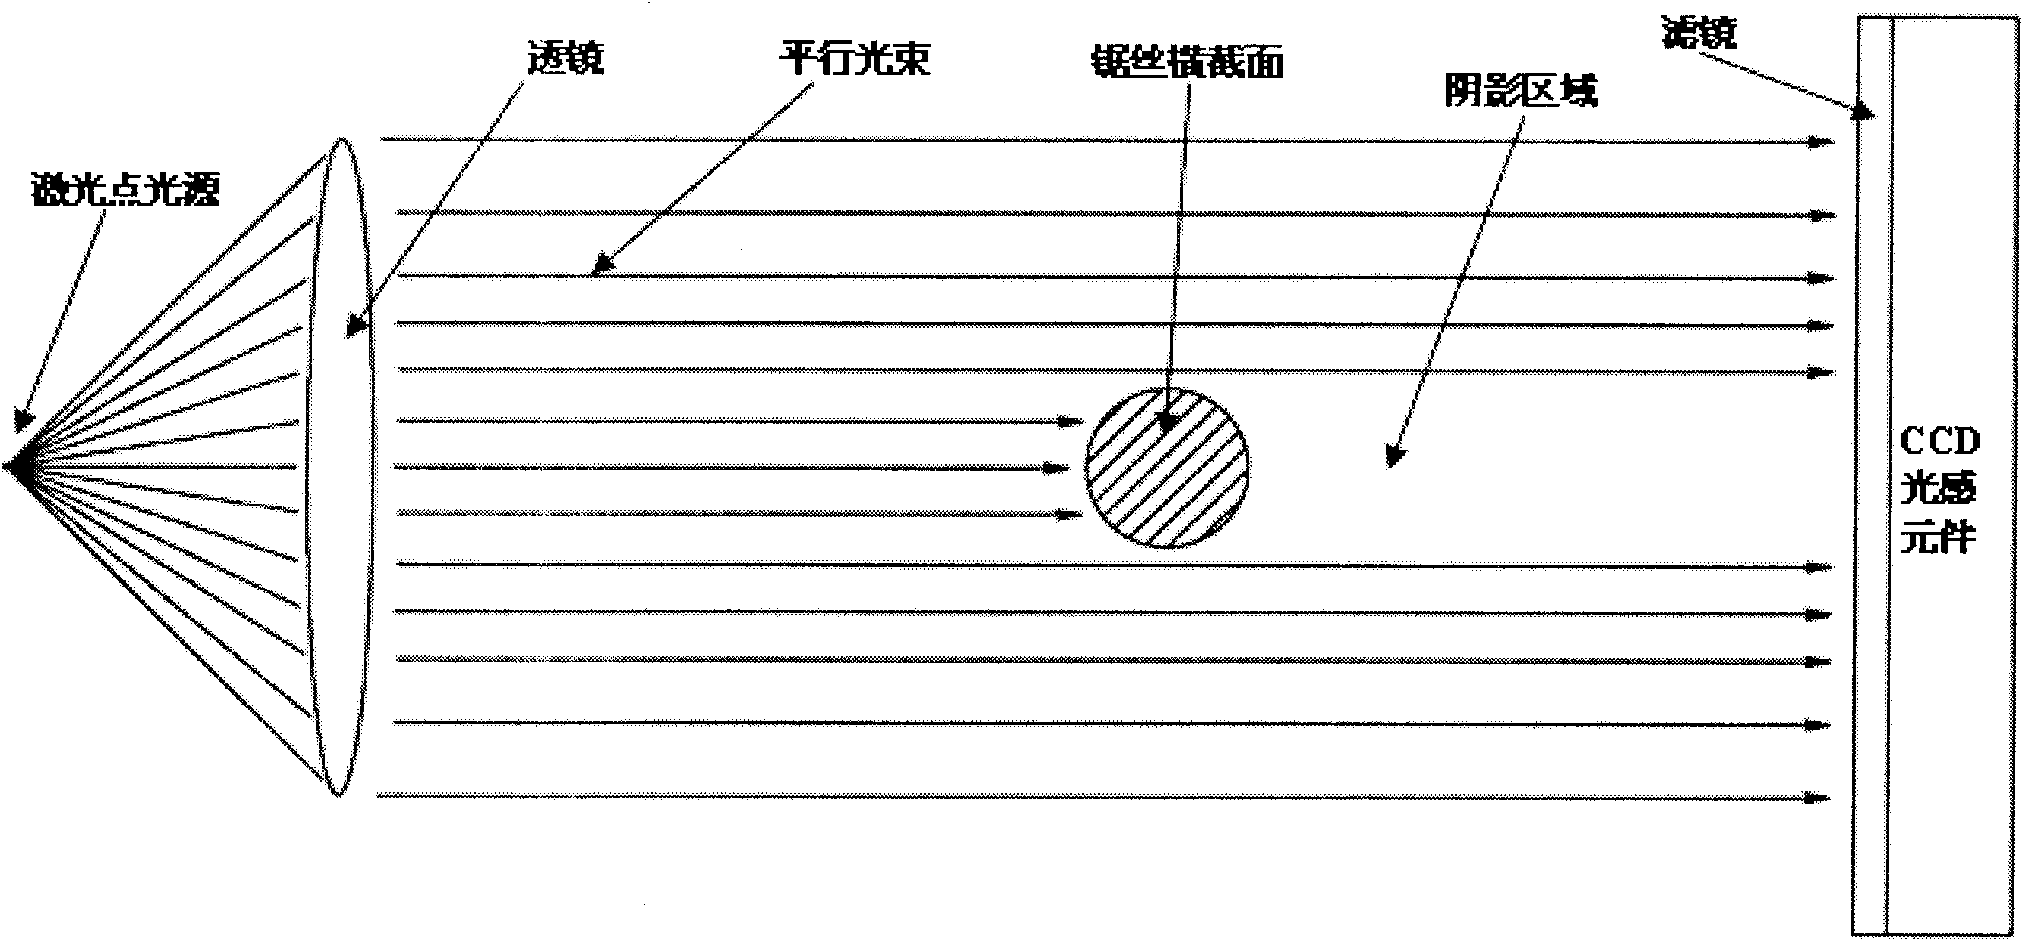 Real-time deviation correcting method for precise cutting process of diamond wire saw